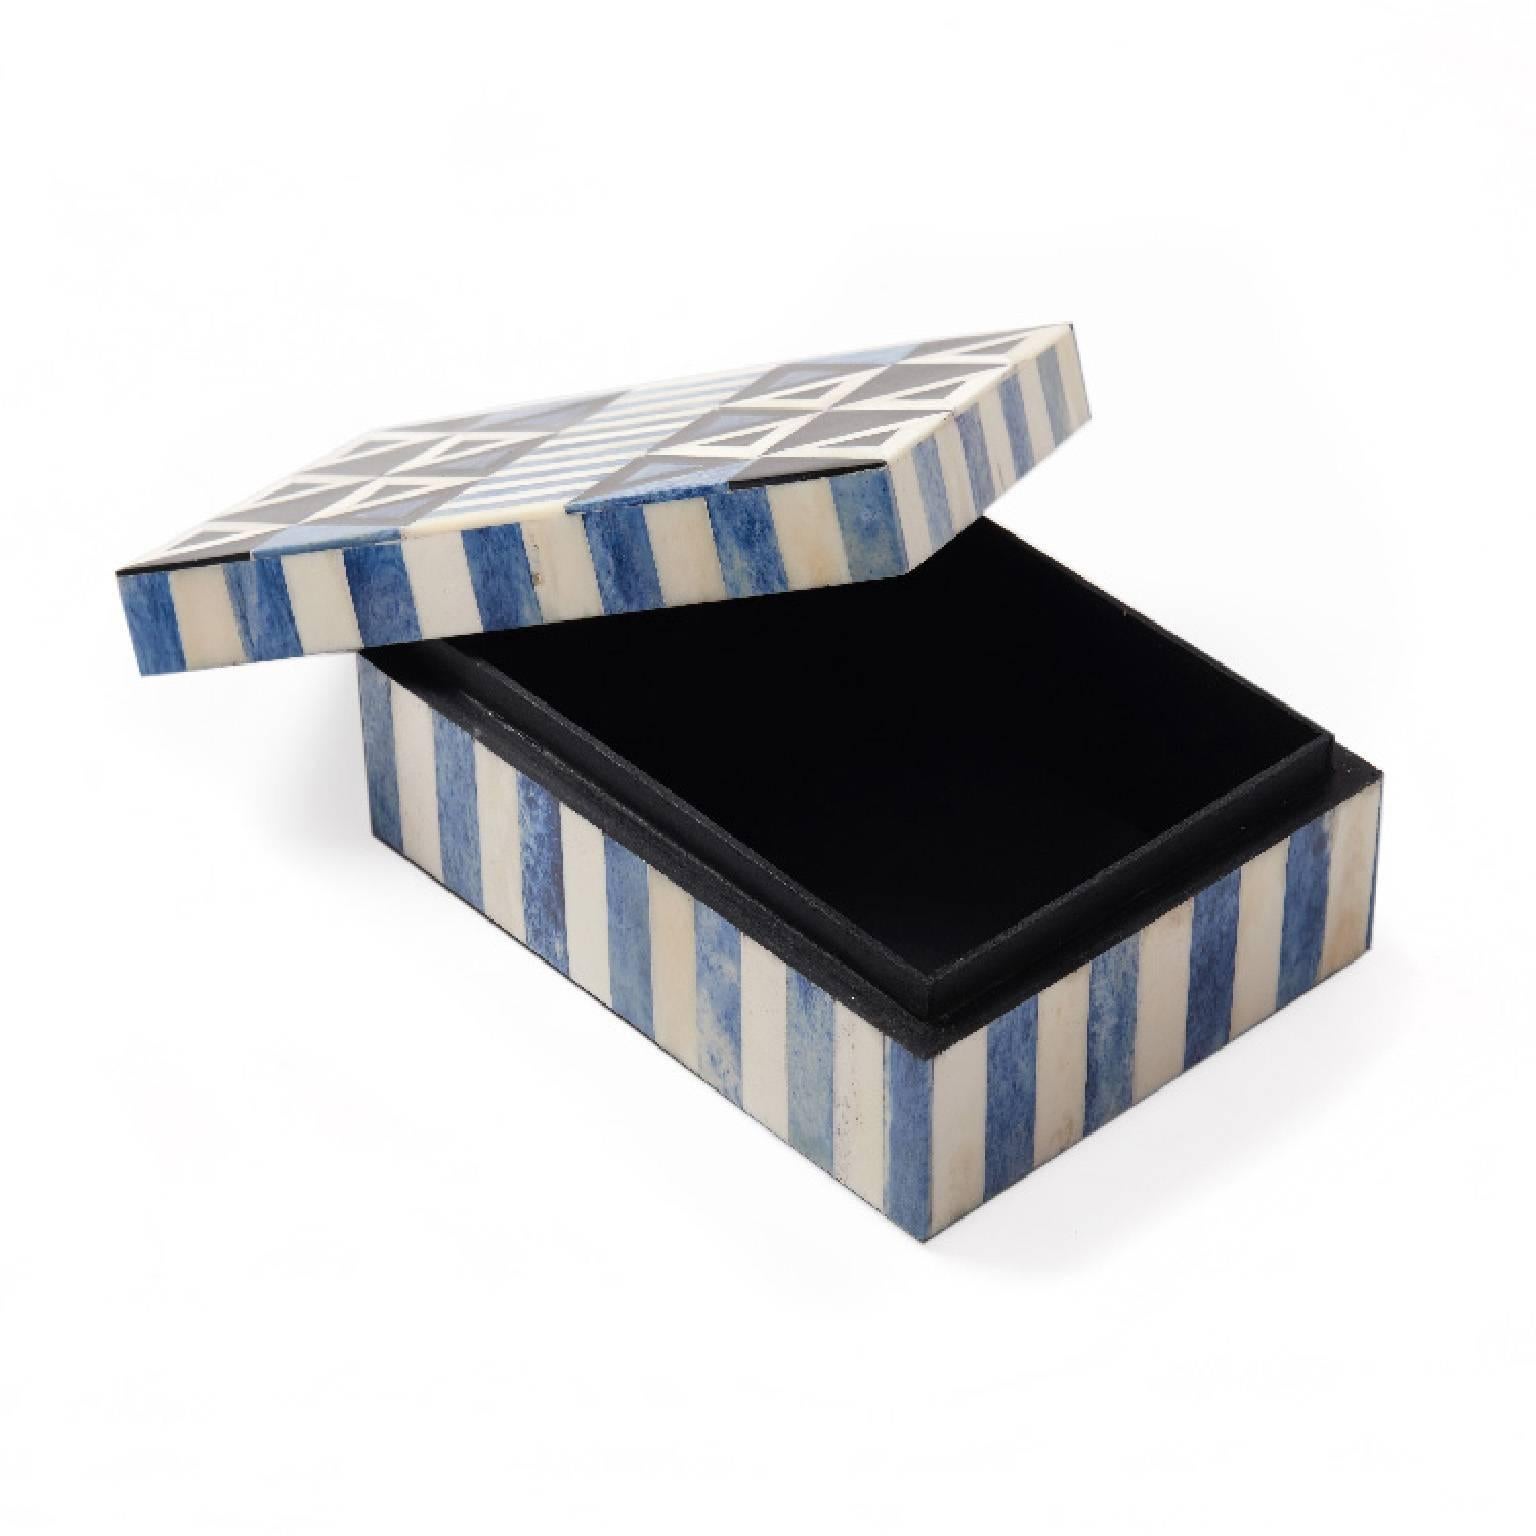 Tash your stuff in style. 

Handcrafted using traditional bone inlay technique. The Okapi box is perfect for jazzing up the top of a dresser or desk.

Measures: 7